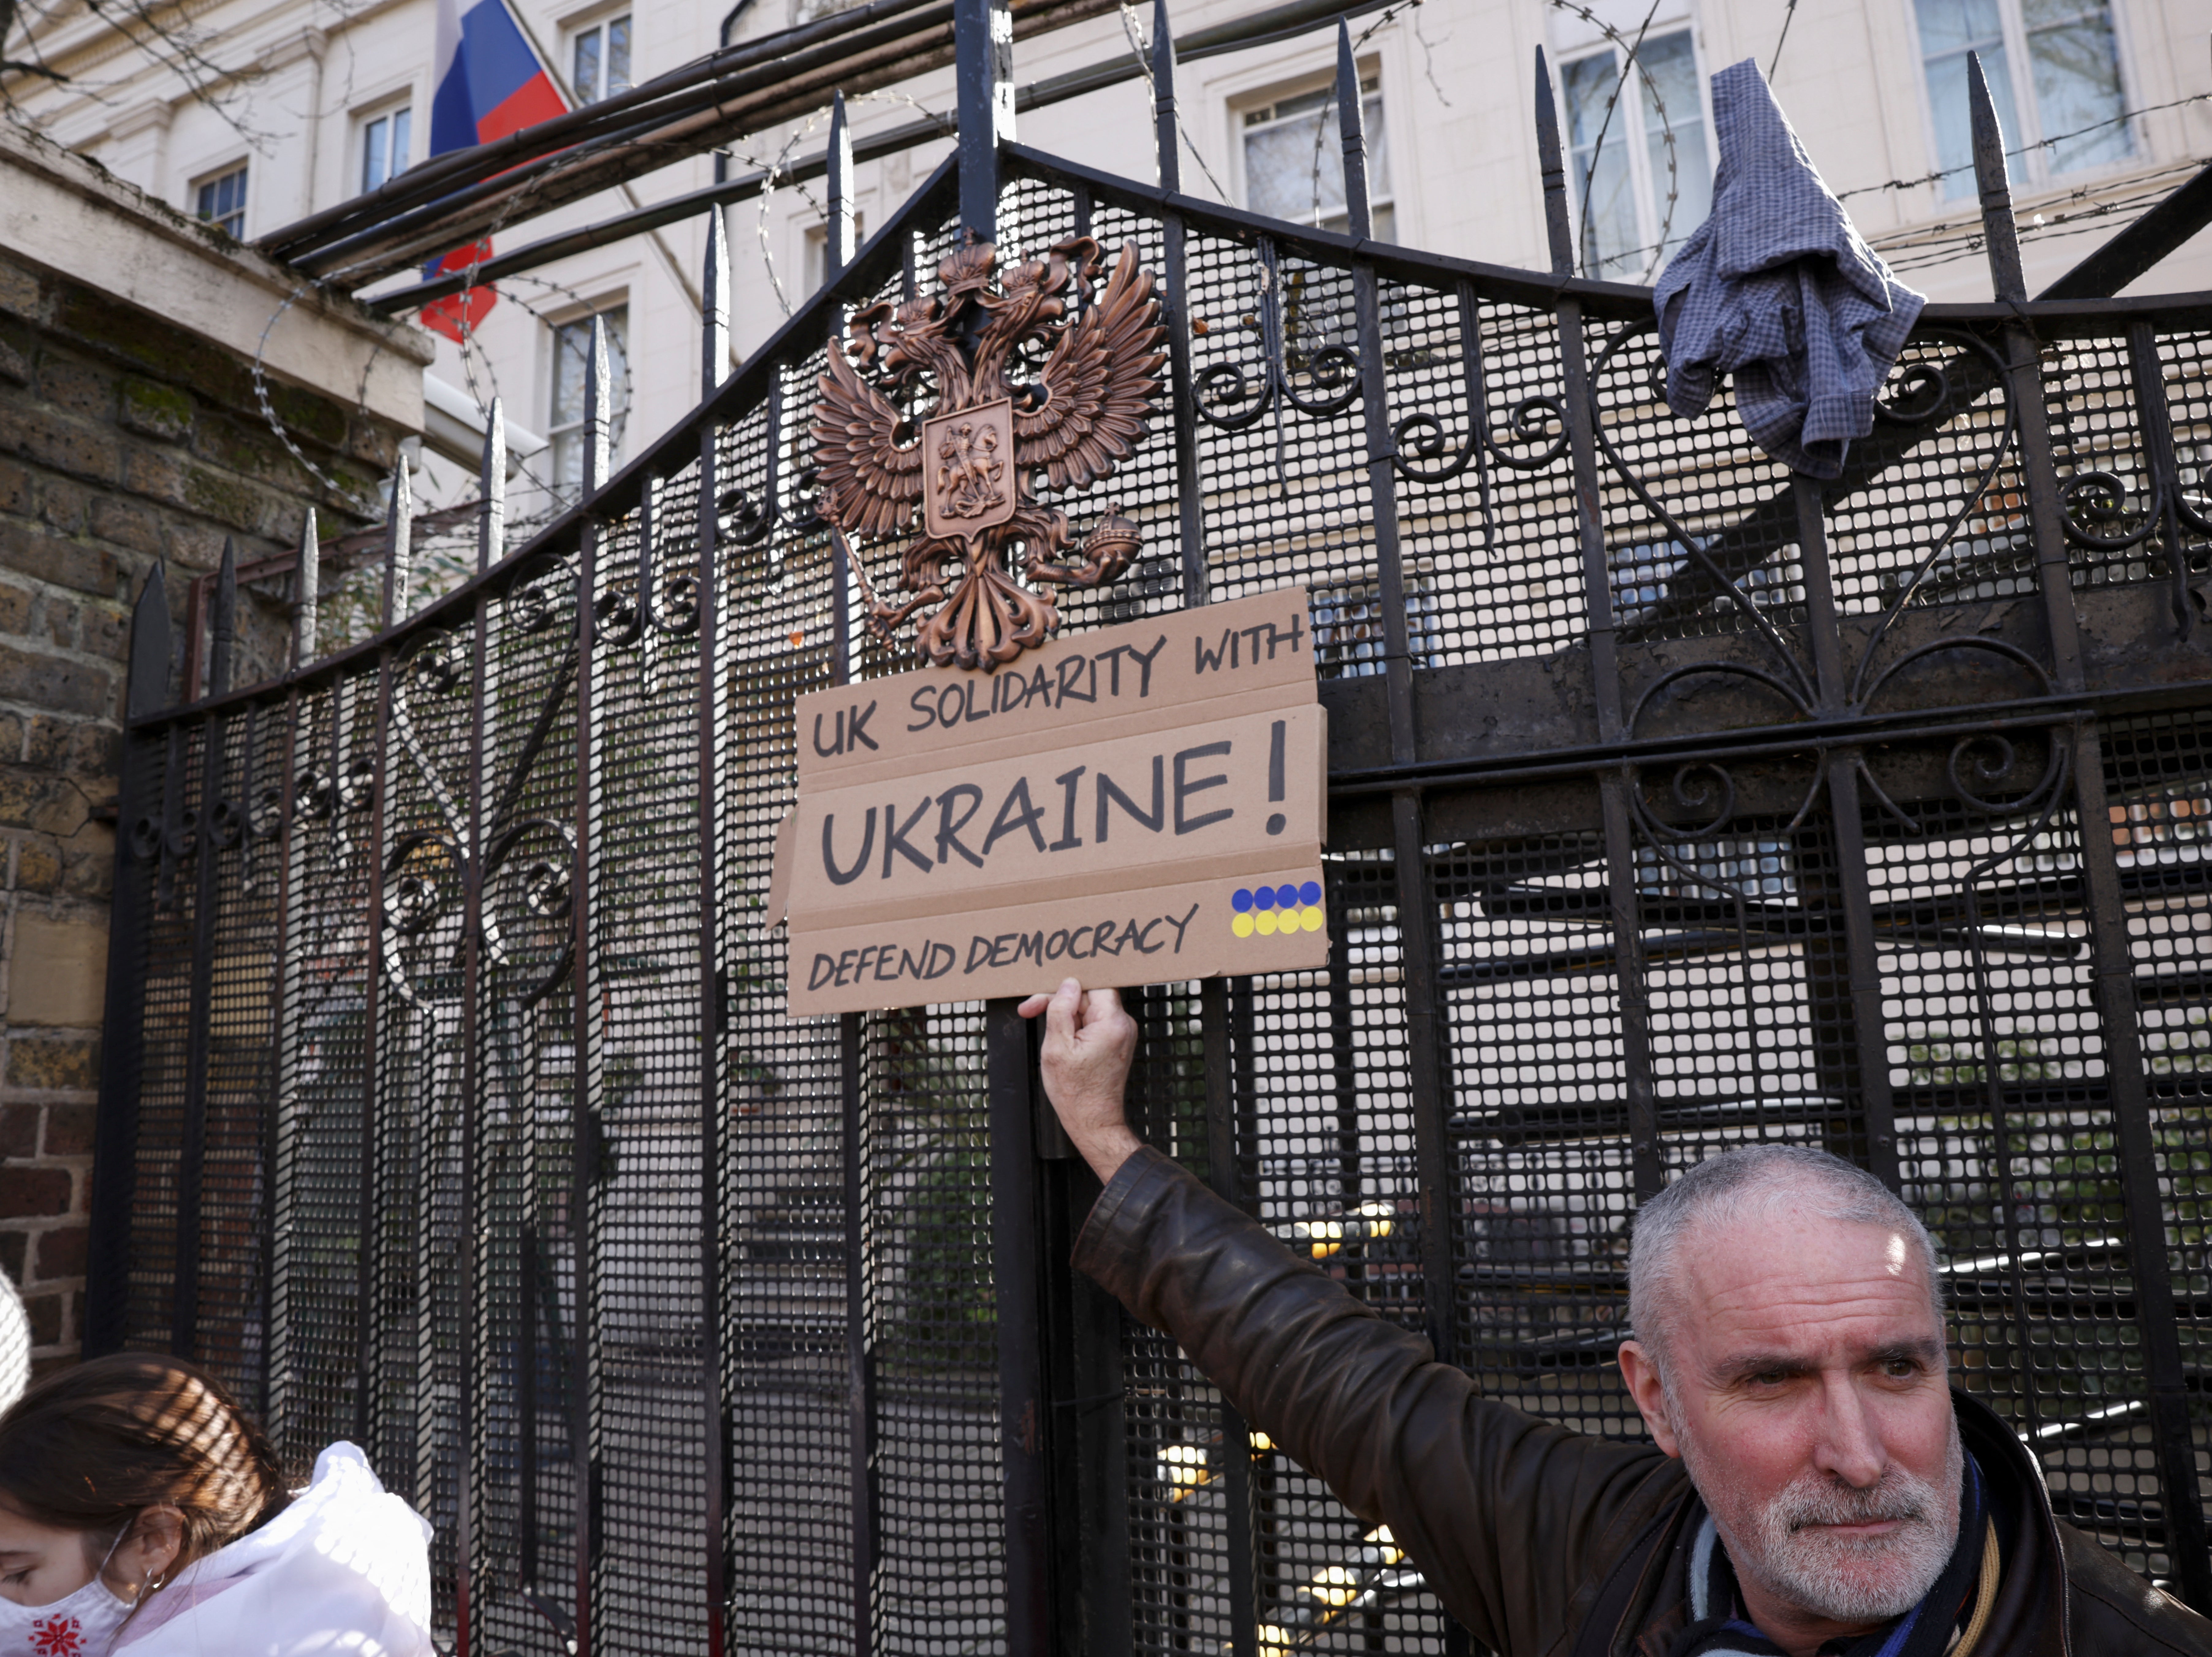 A protester holds a sign in front of the gate of the Russian embassy during an anti-war protest in London